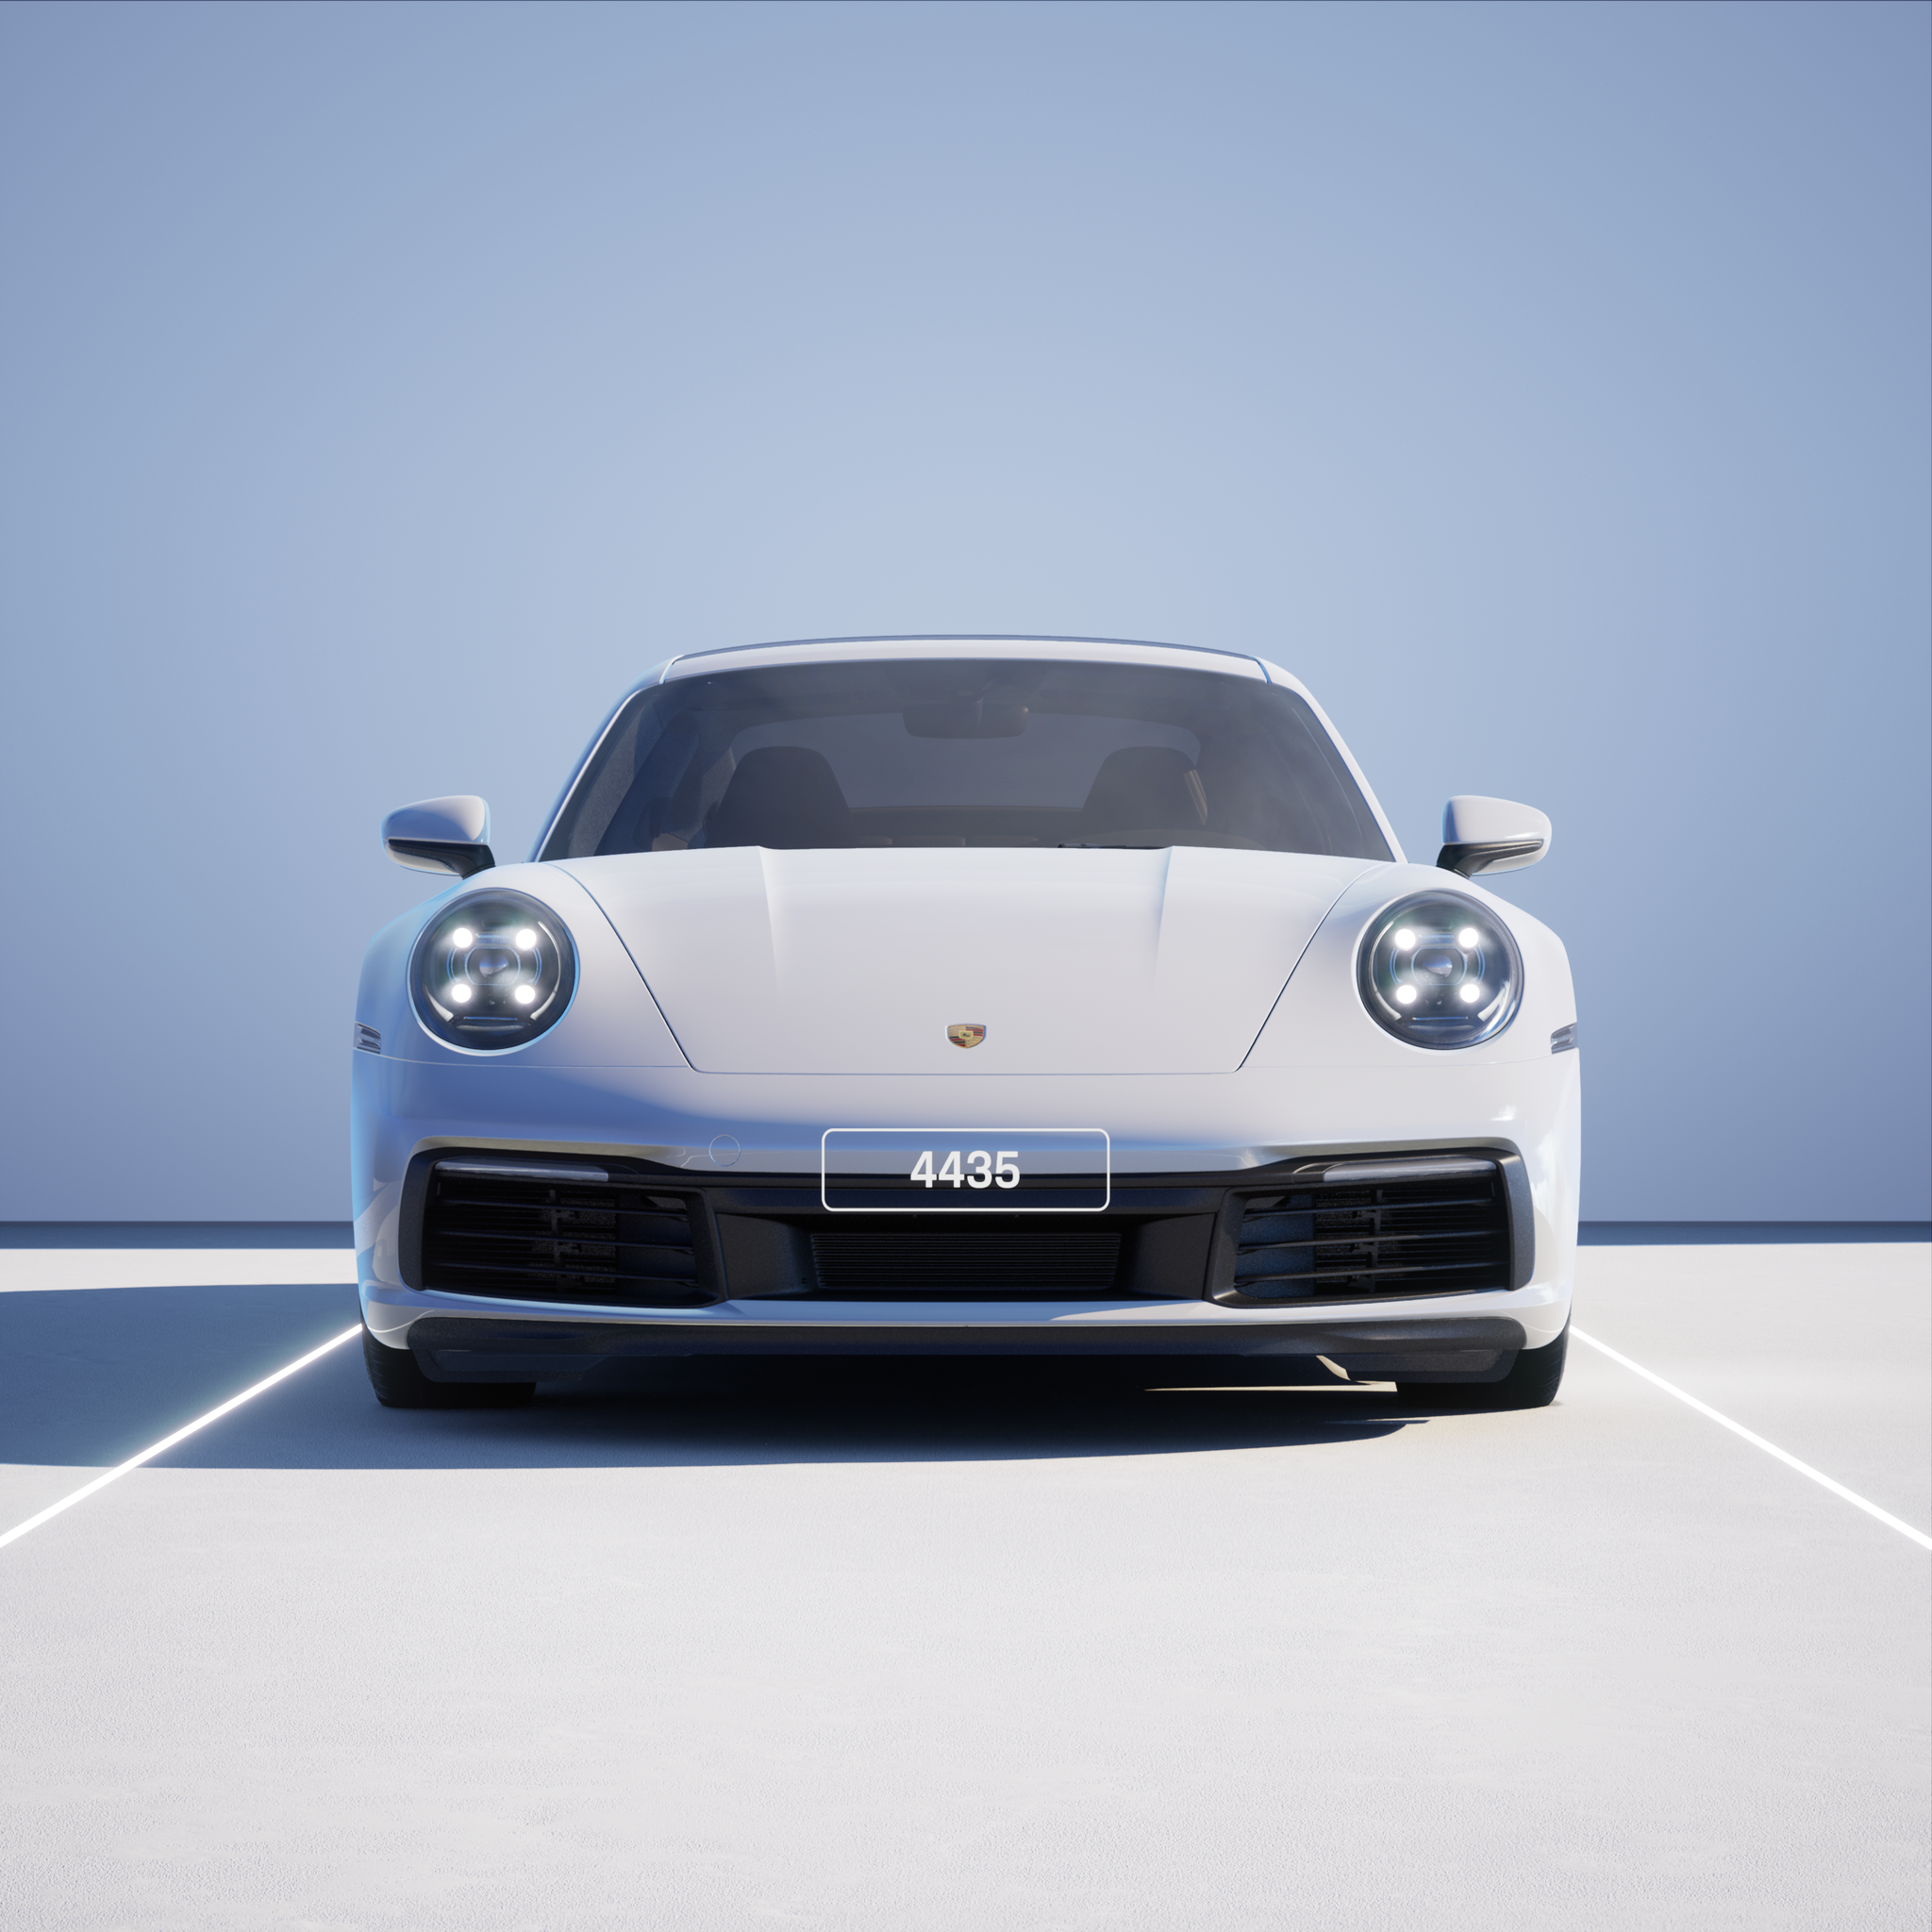 The PORSCHΞ 911 4435 image in phase